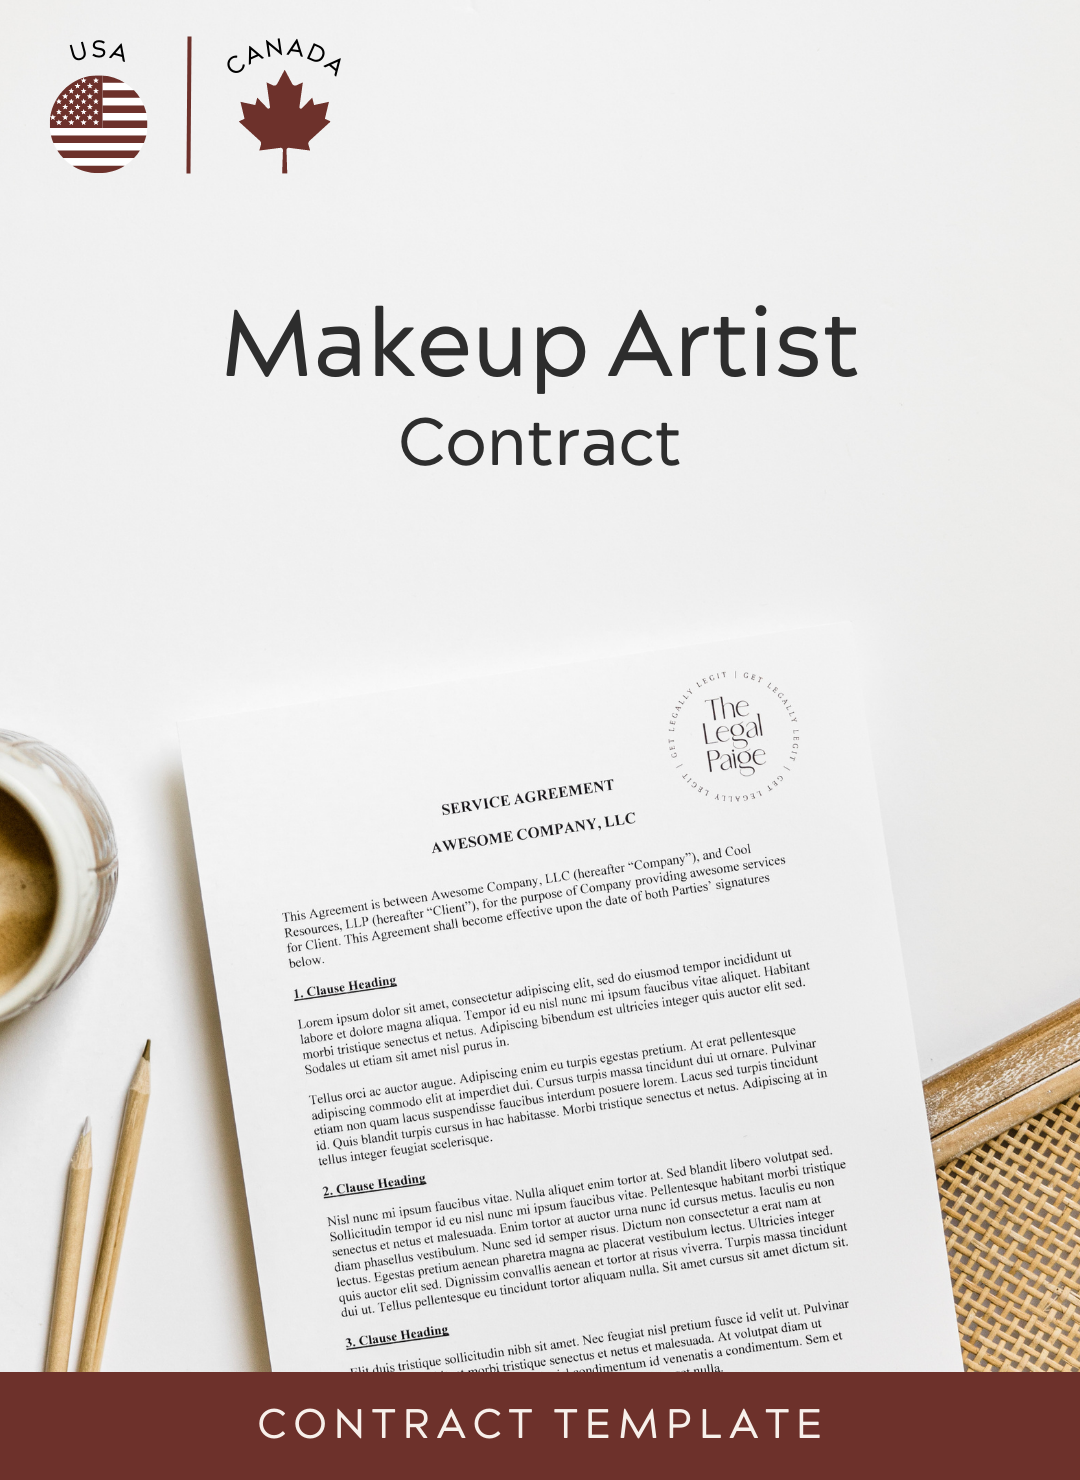 Makeup Artist Contract The Legal Paige